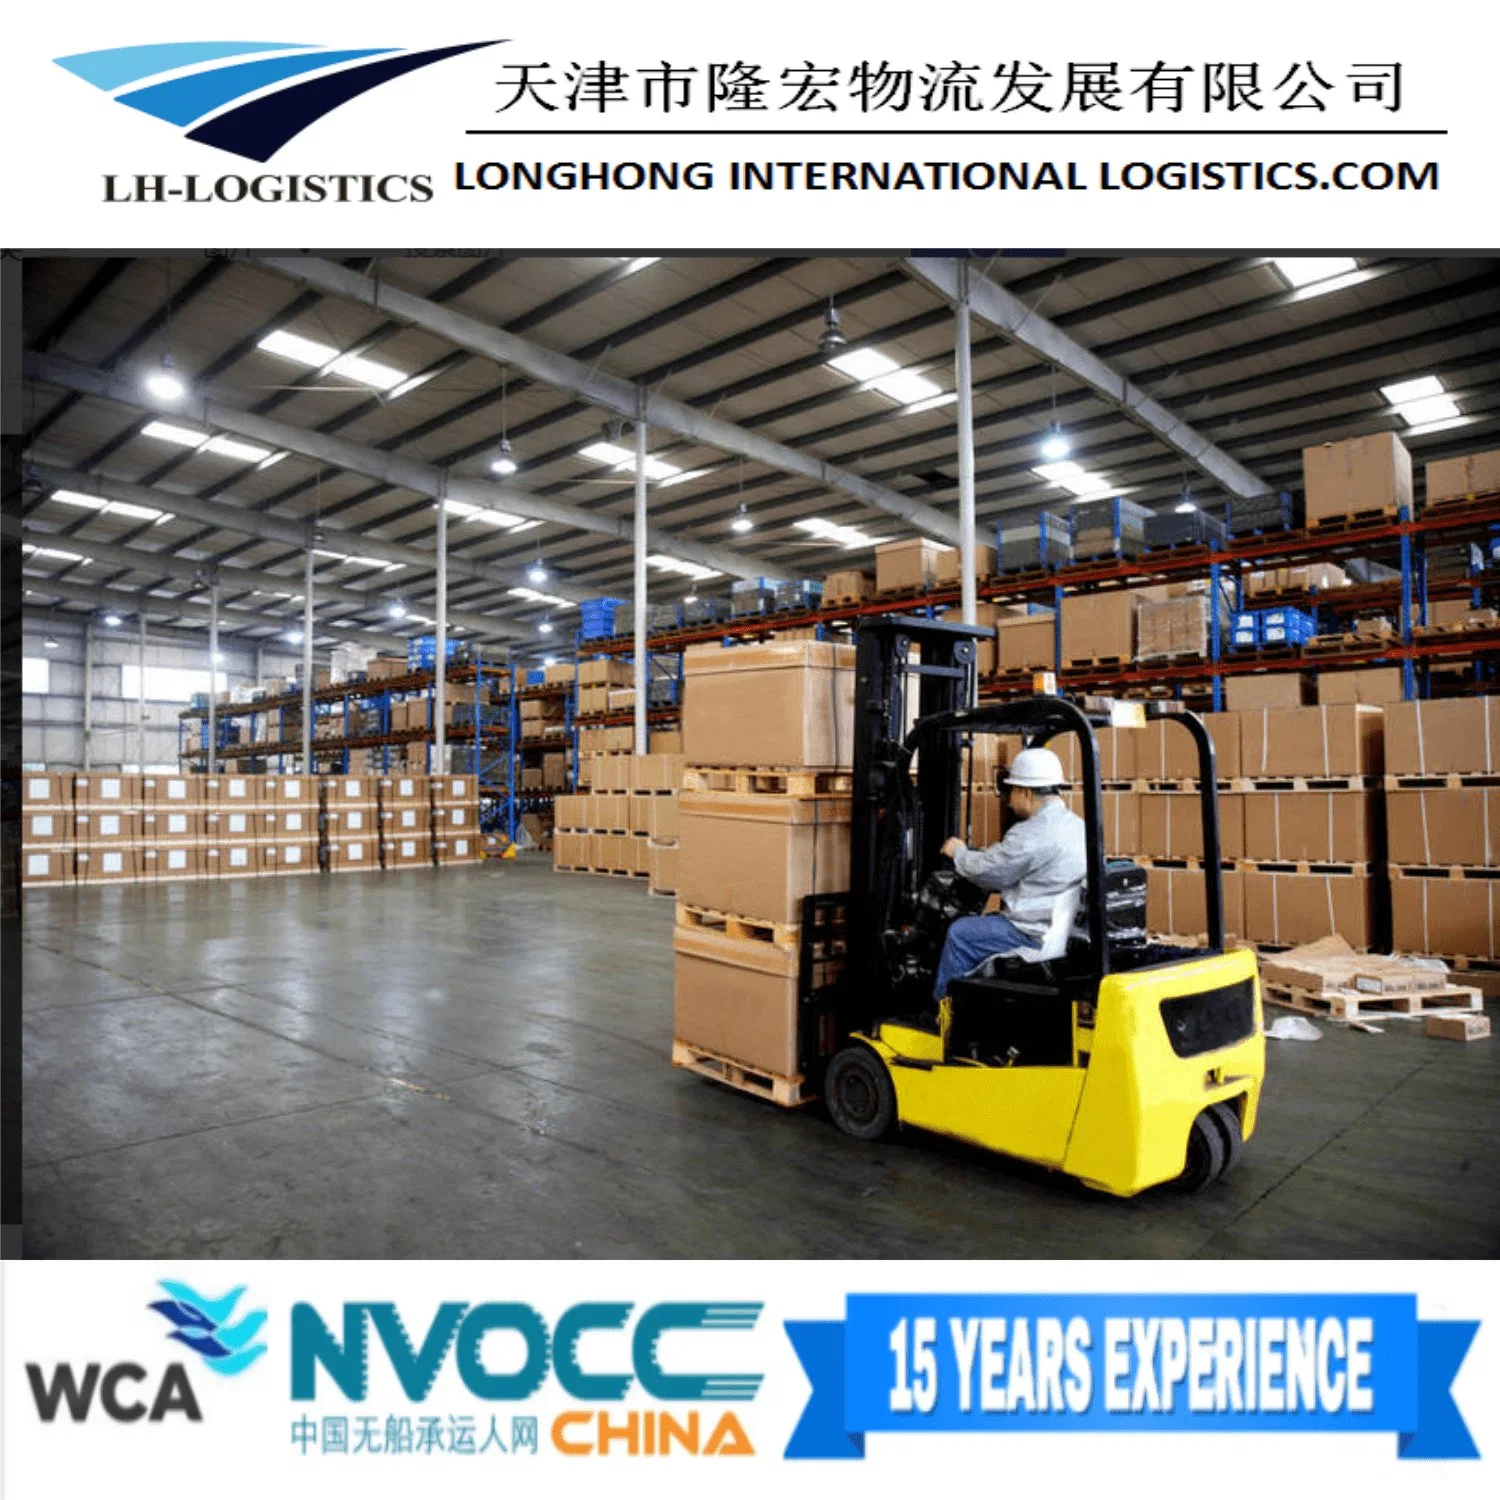 Air Freight Services From China to Australia. 1688